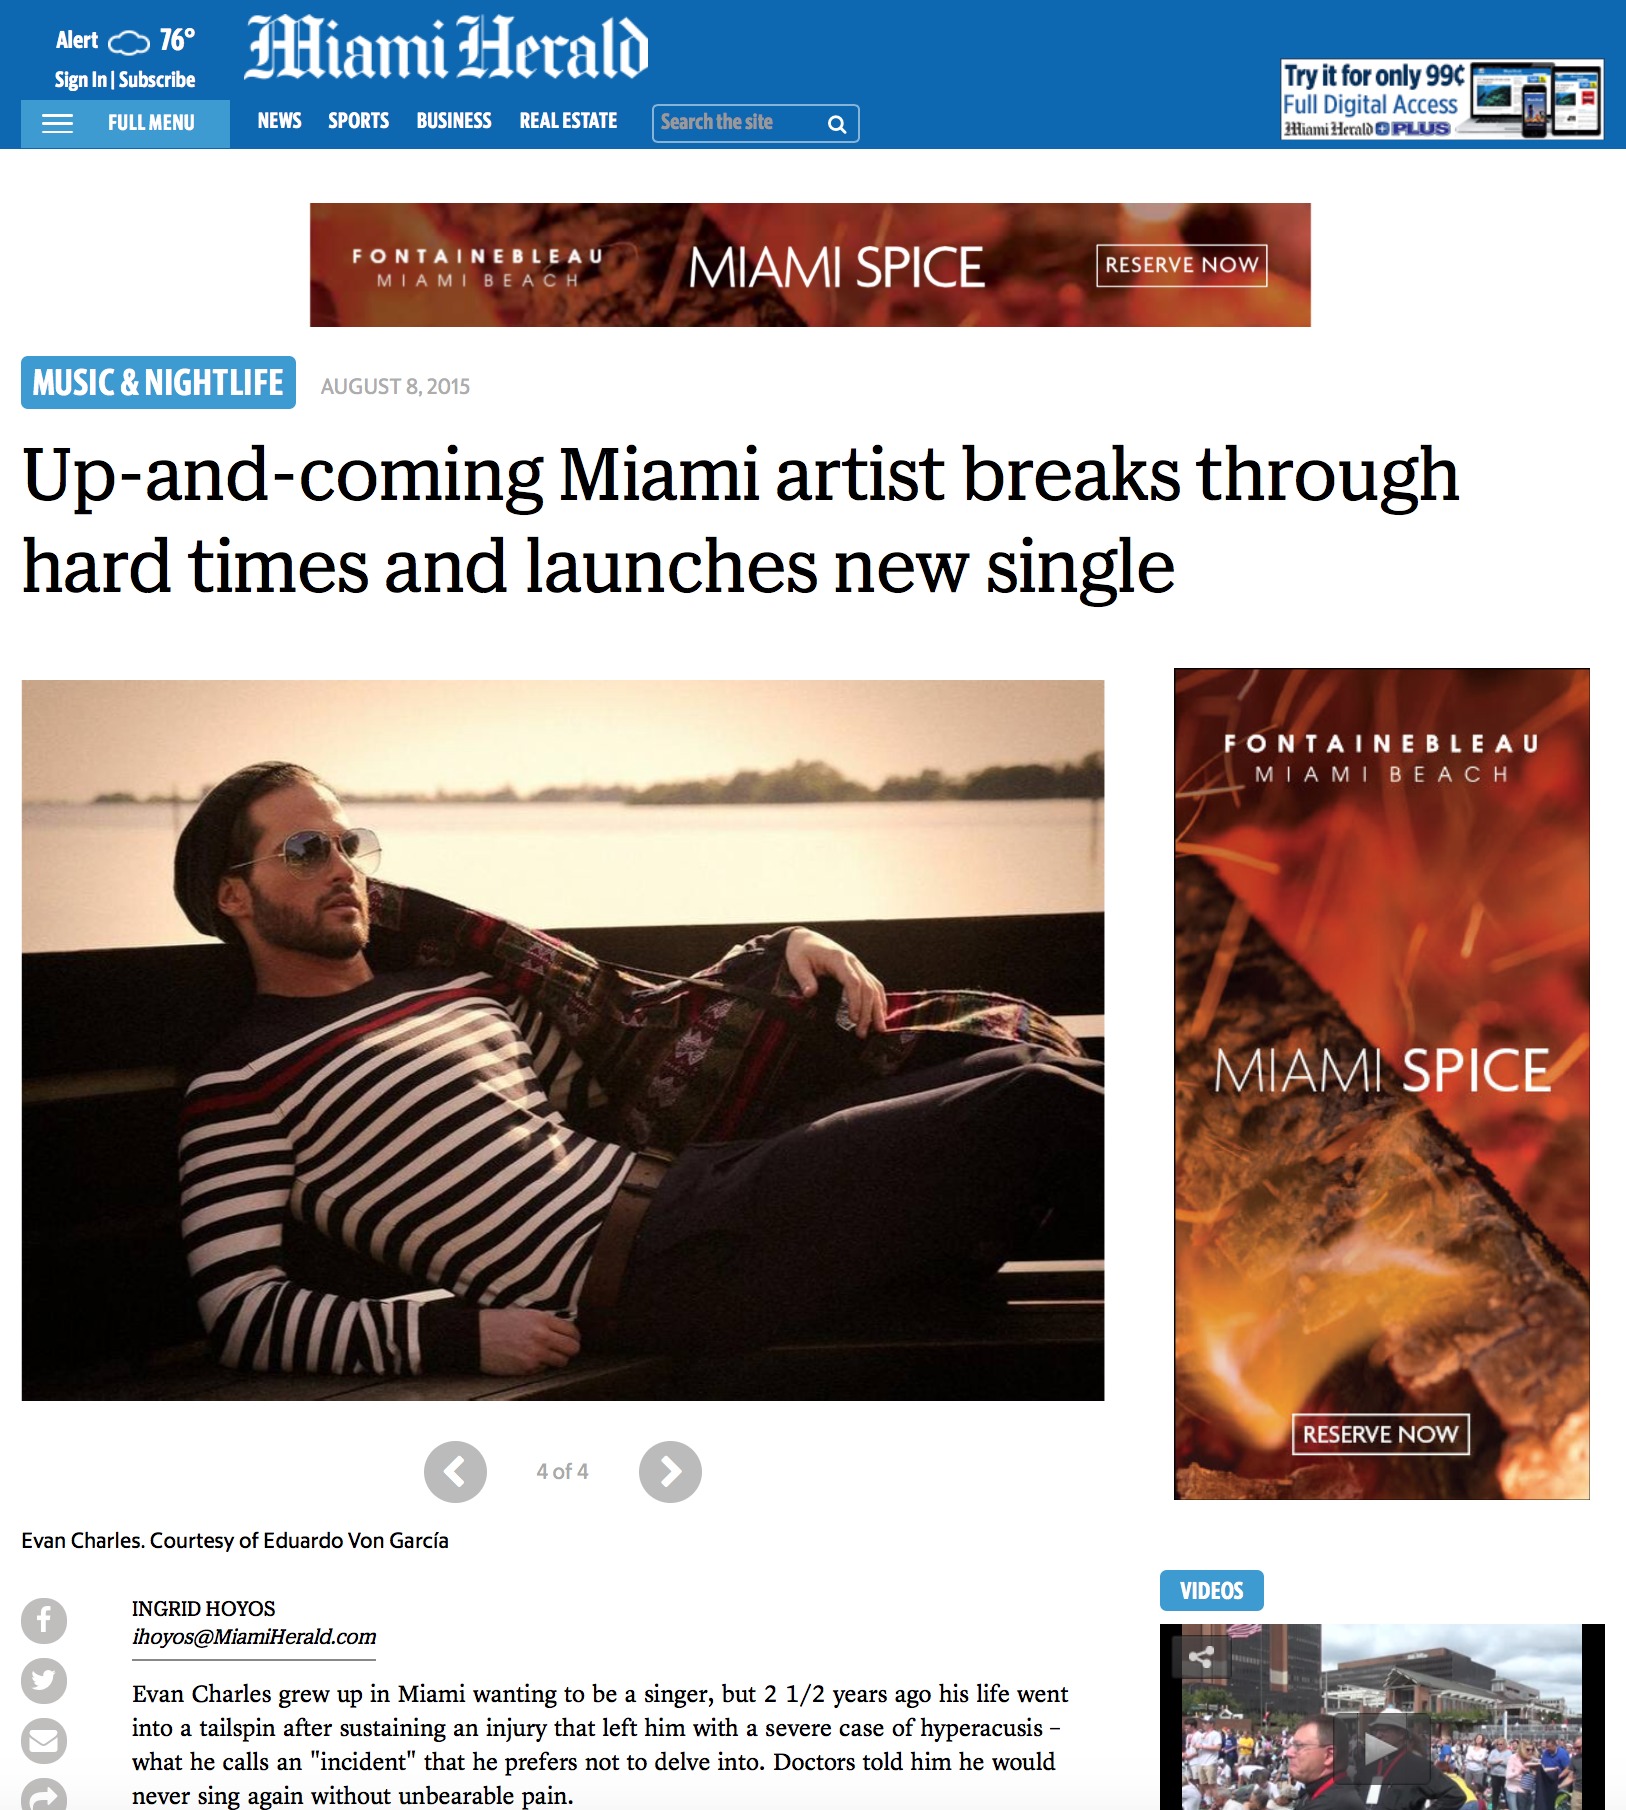 Evan_Charles_Miami_Herald_Article_Page_1